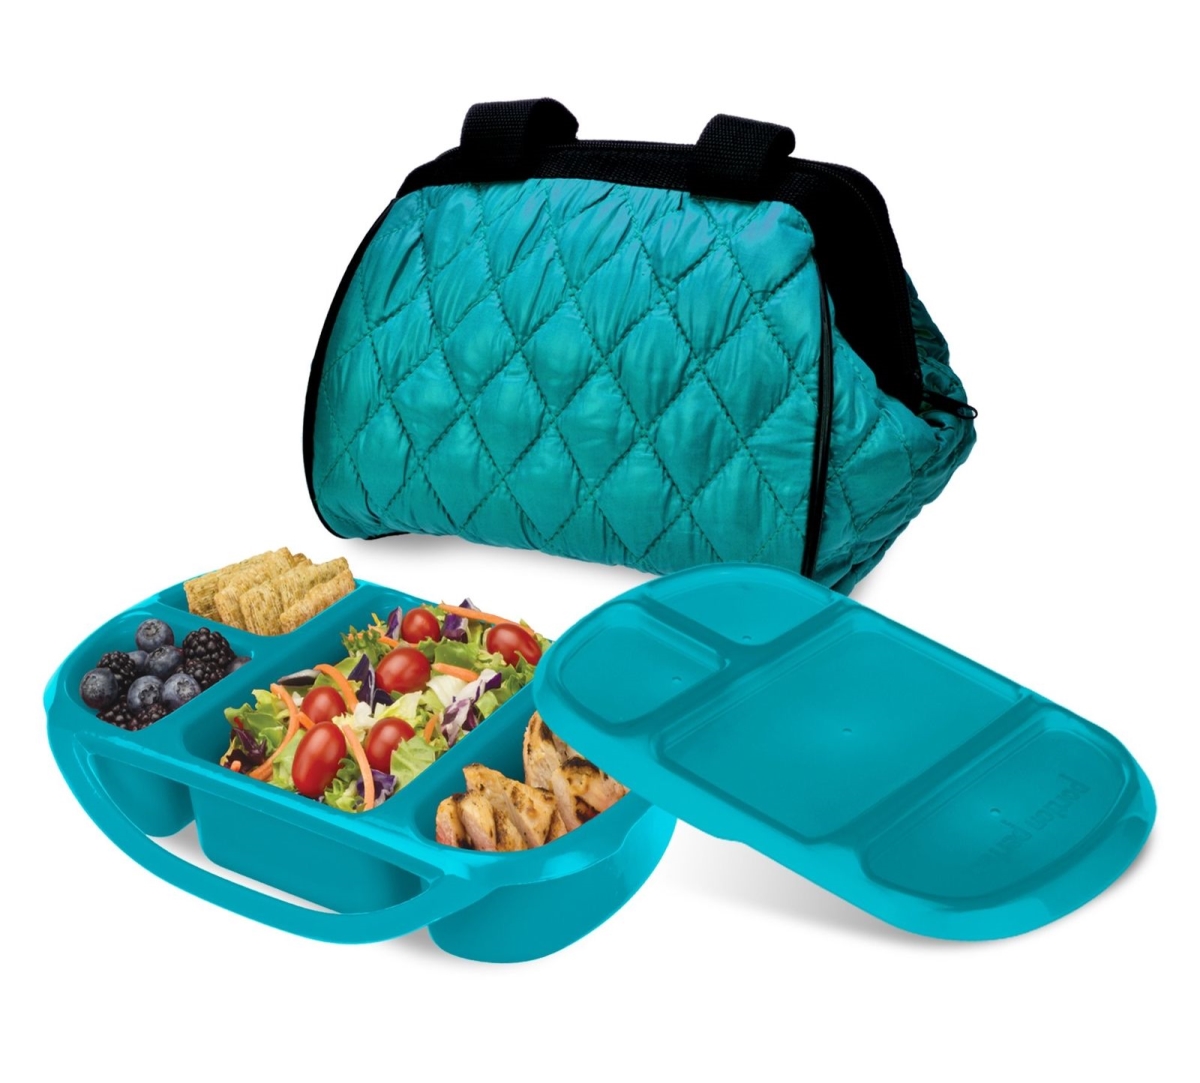 Pp1pbst Portion Perfect Puffer Bag Set, Turqoise